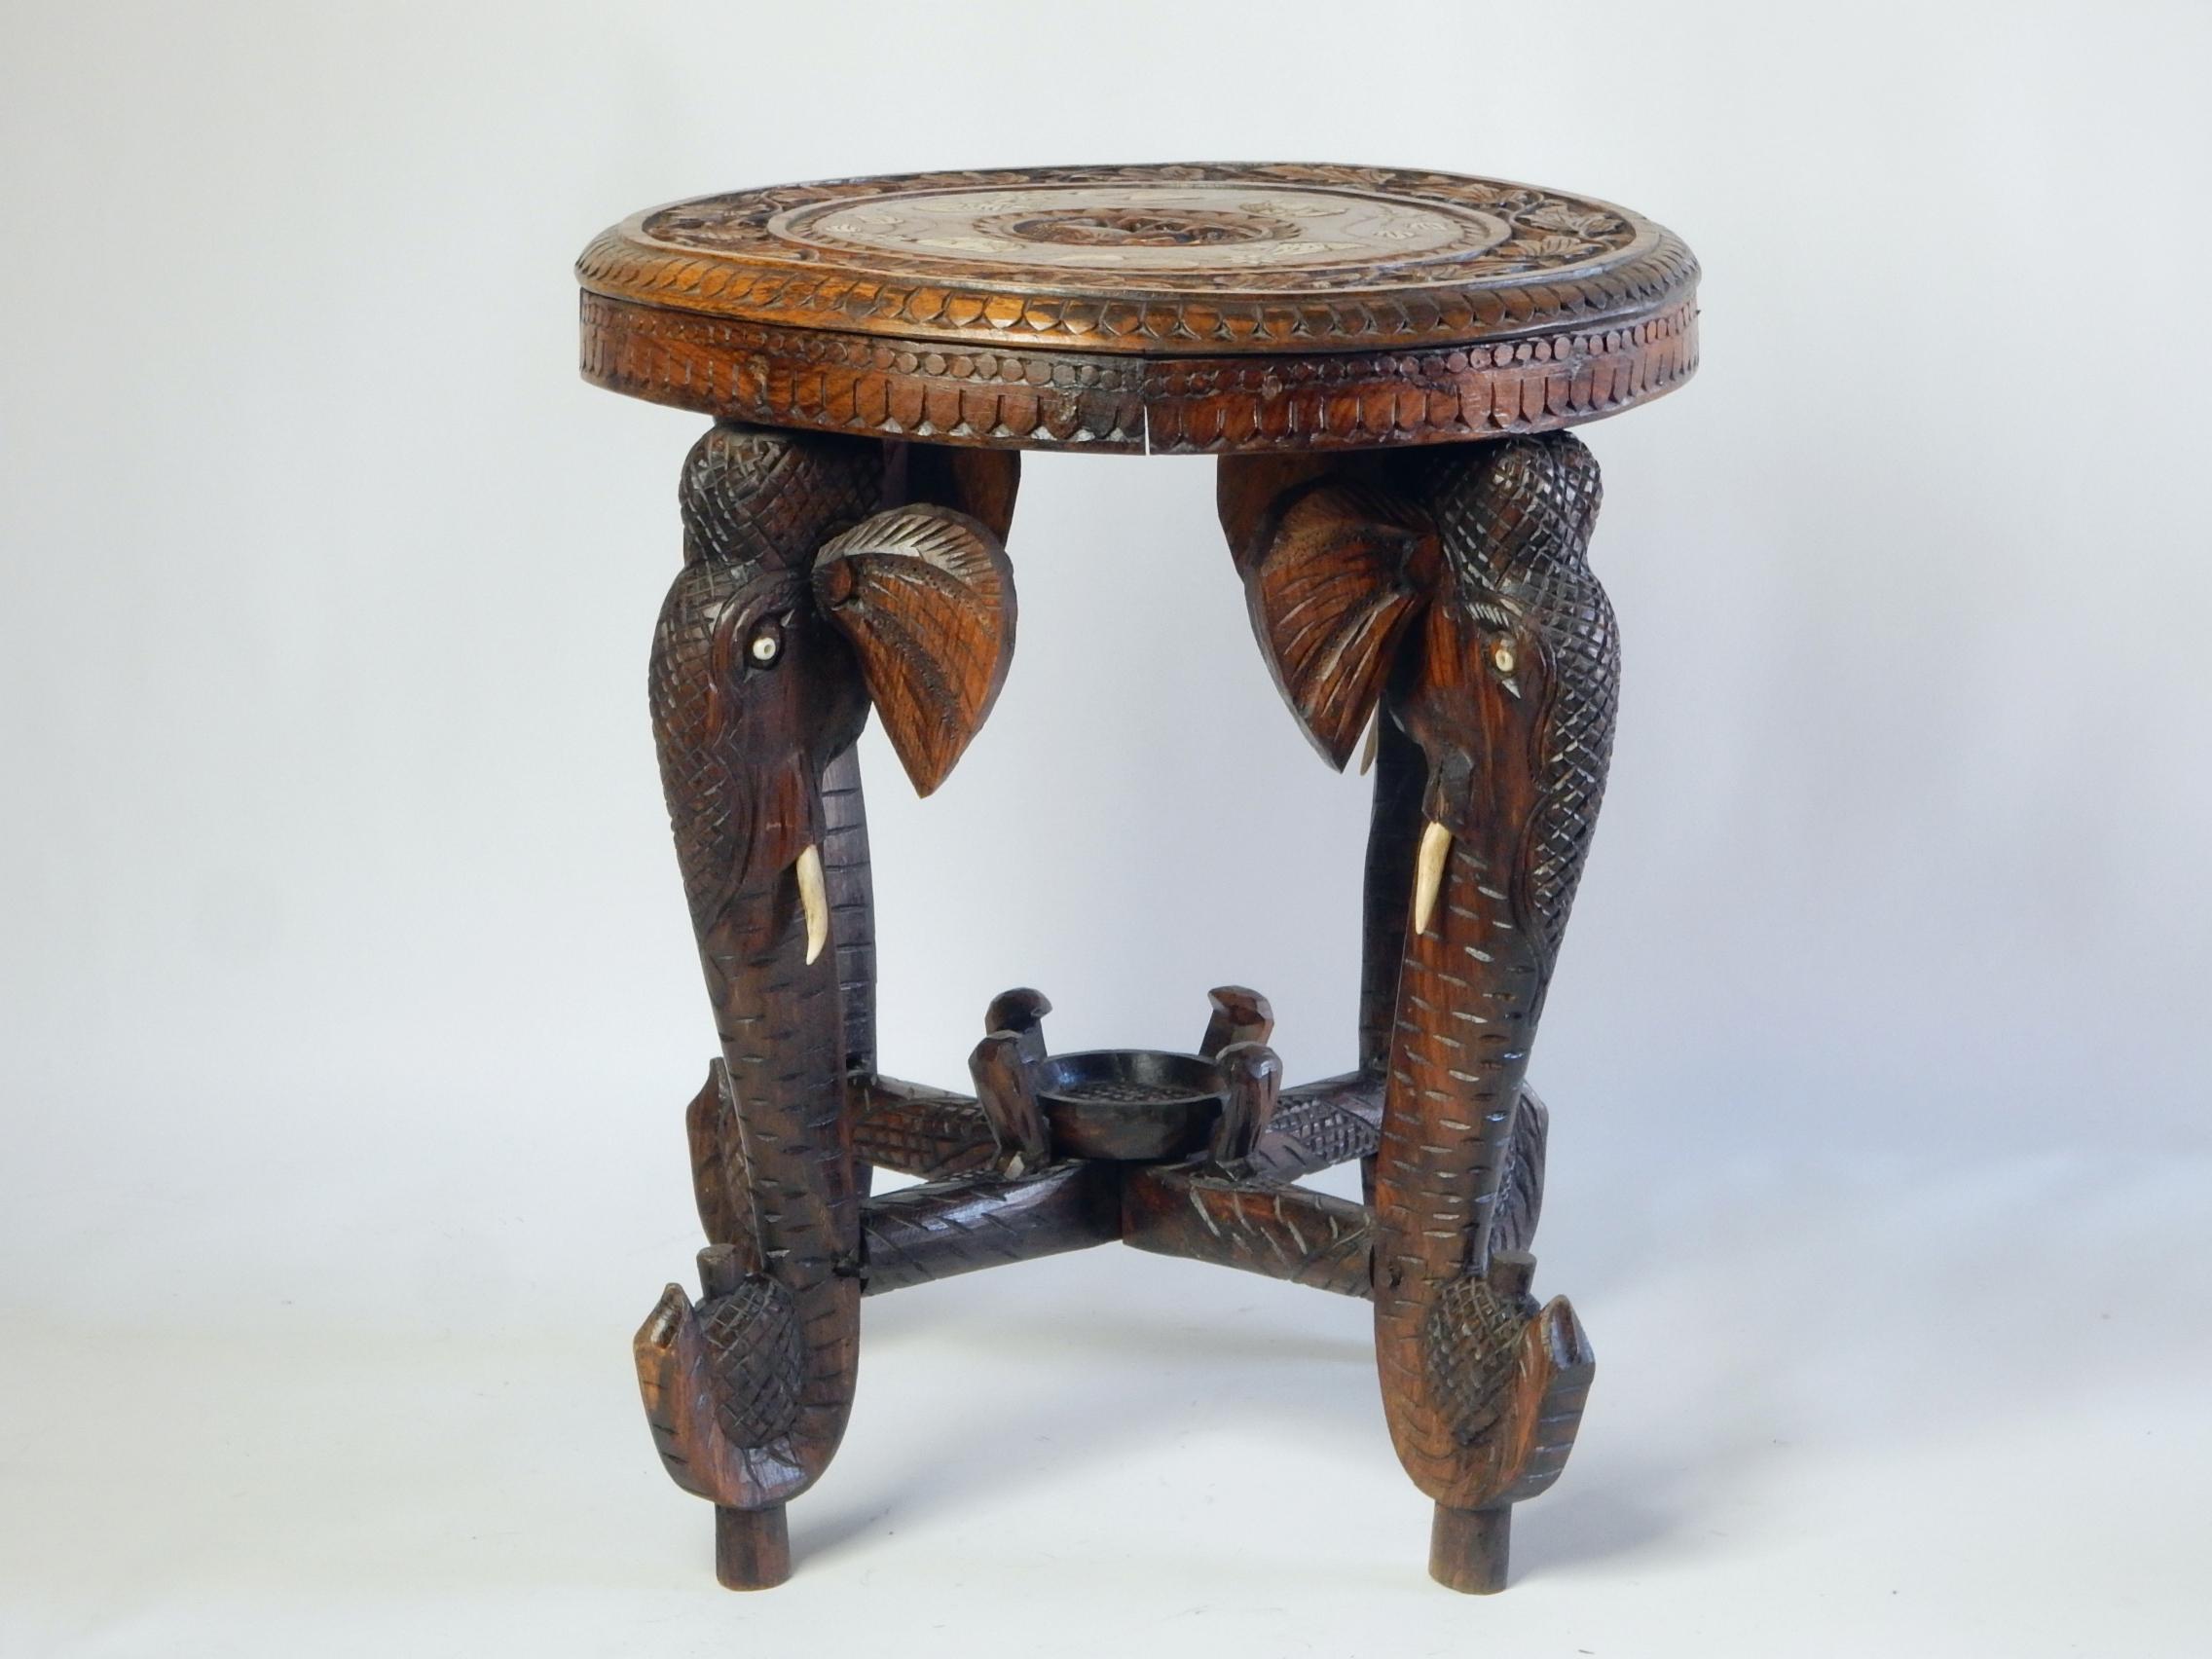 Antique 1900's Anglo-Raj Indian Elephant Leg Gueridon Table with Bone Inlay Top 1